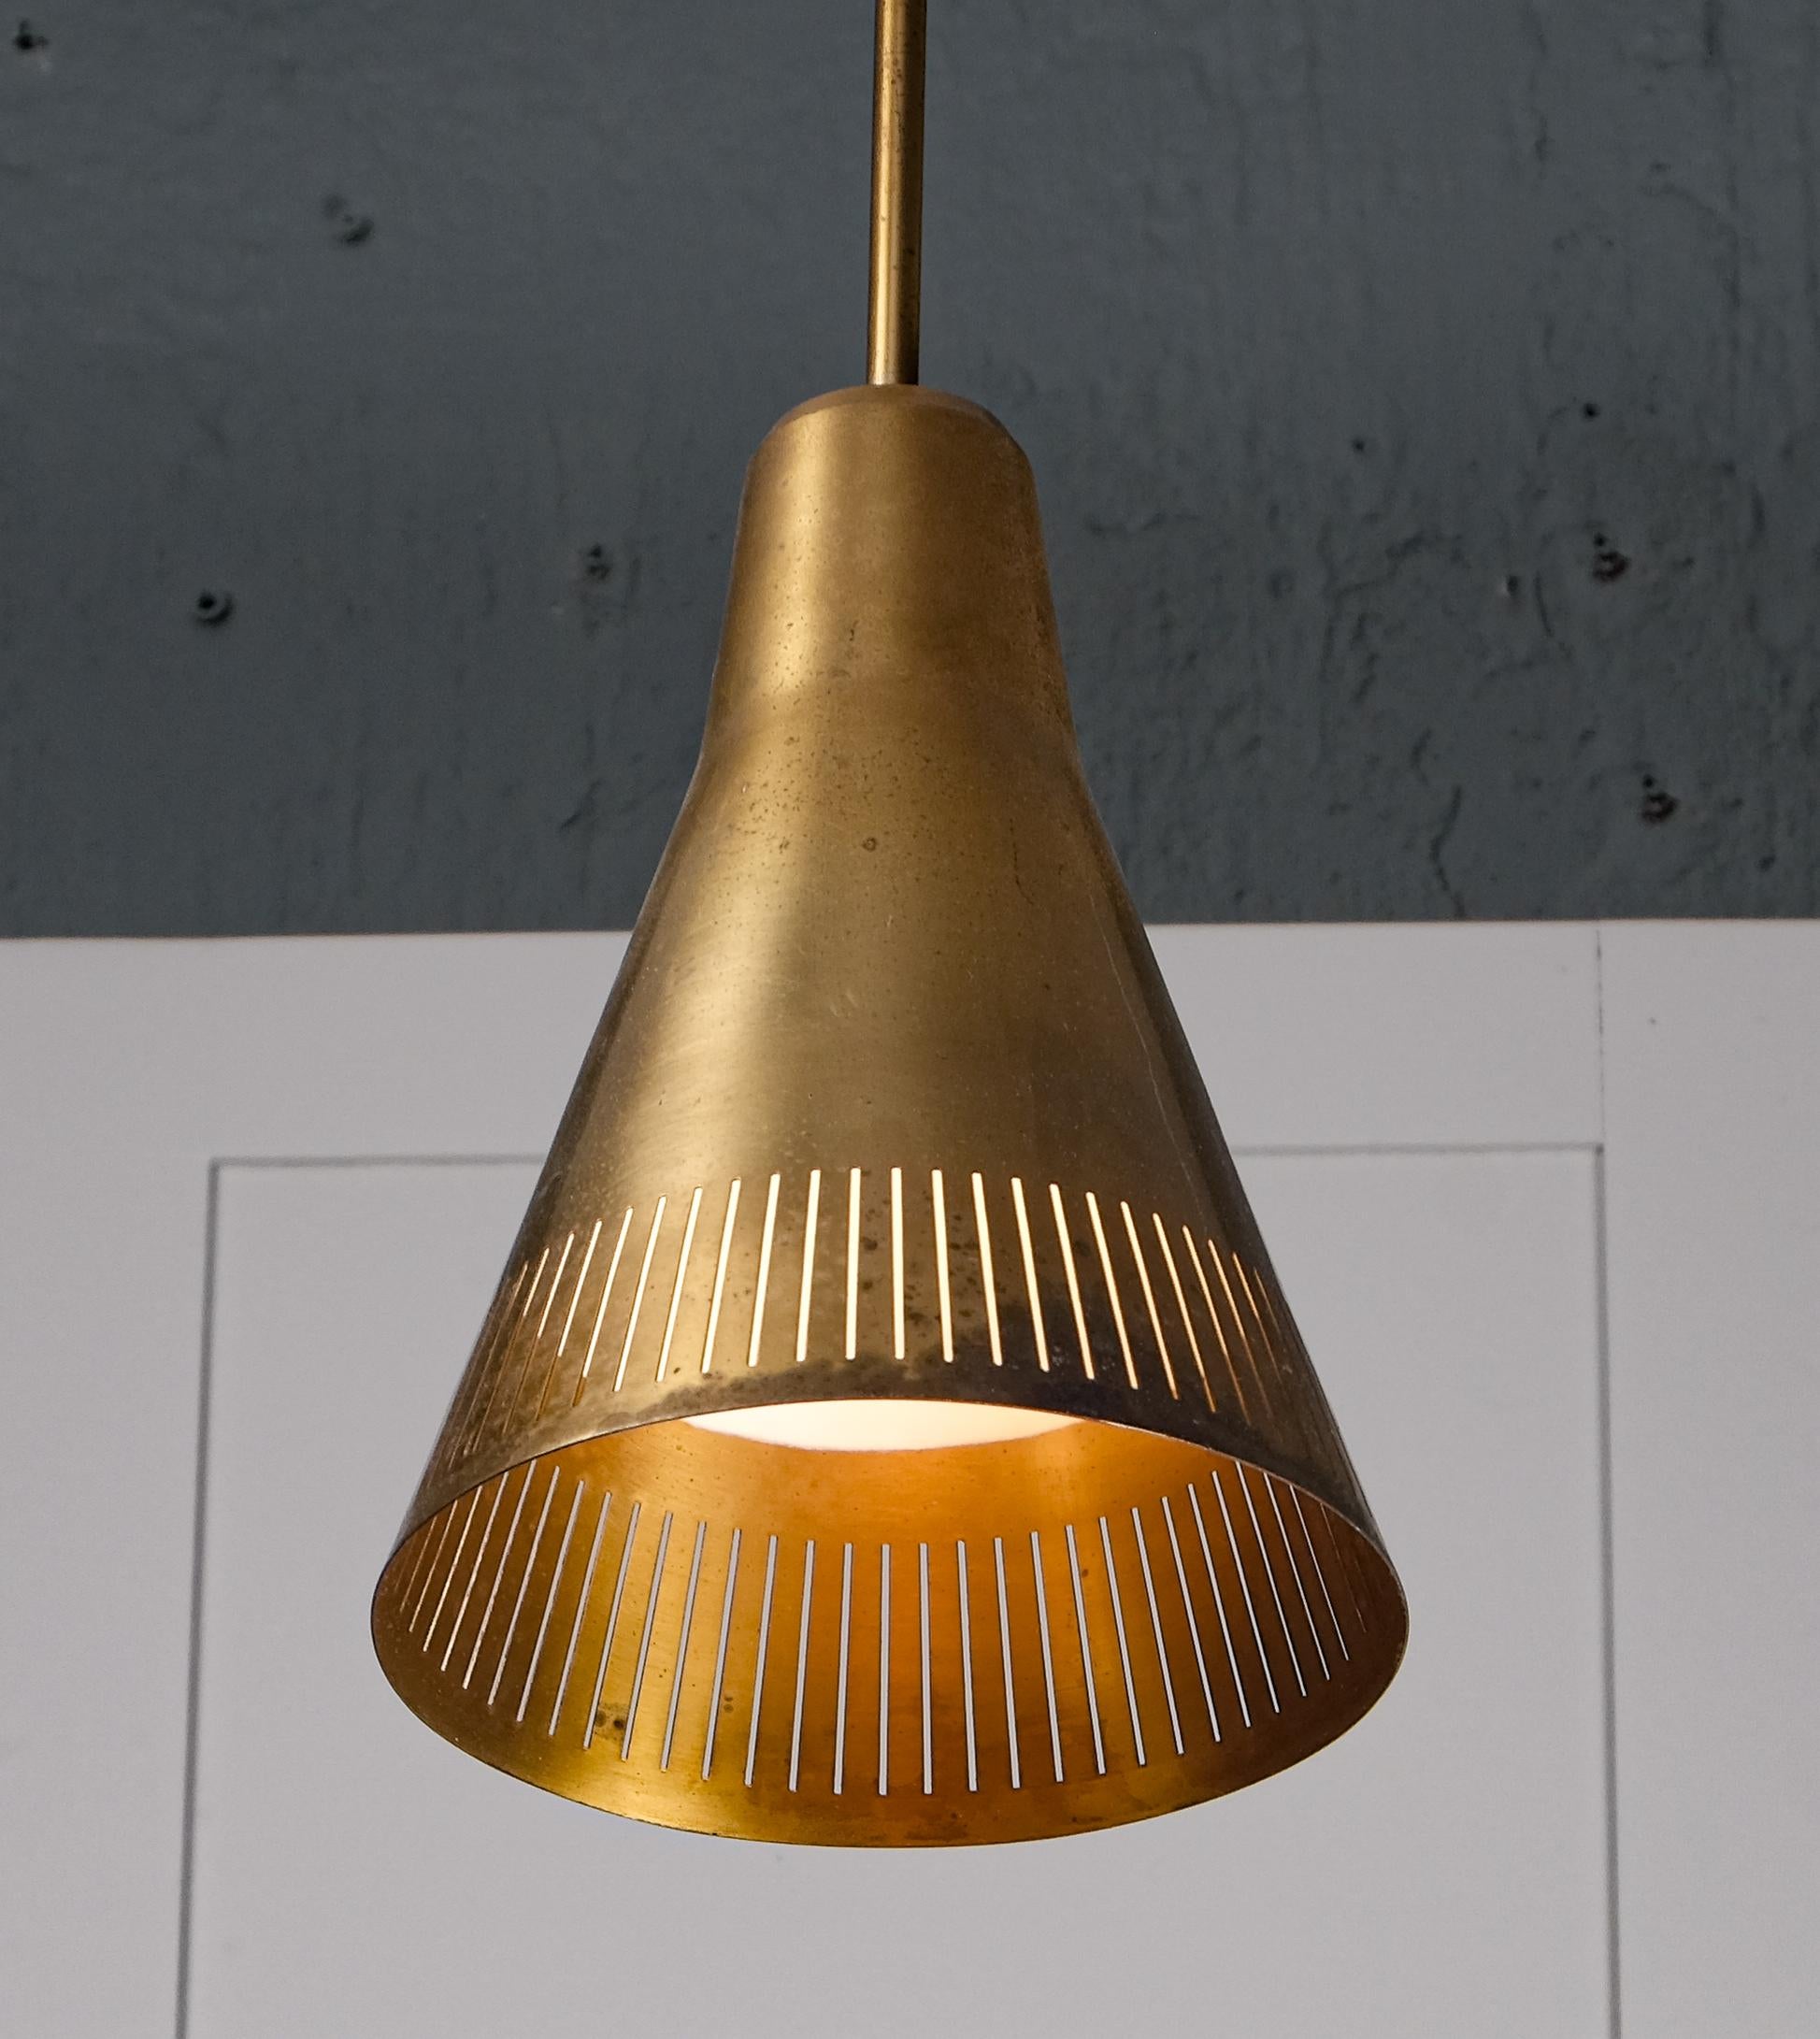 Produced by ASEA,, Sweden, 1950s.
Rewired. Height is adjustable. Perforated brass.